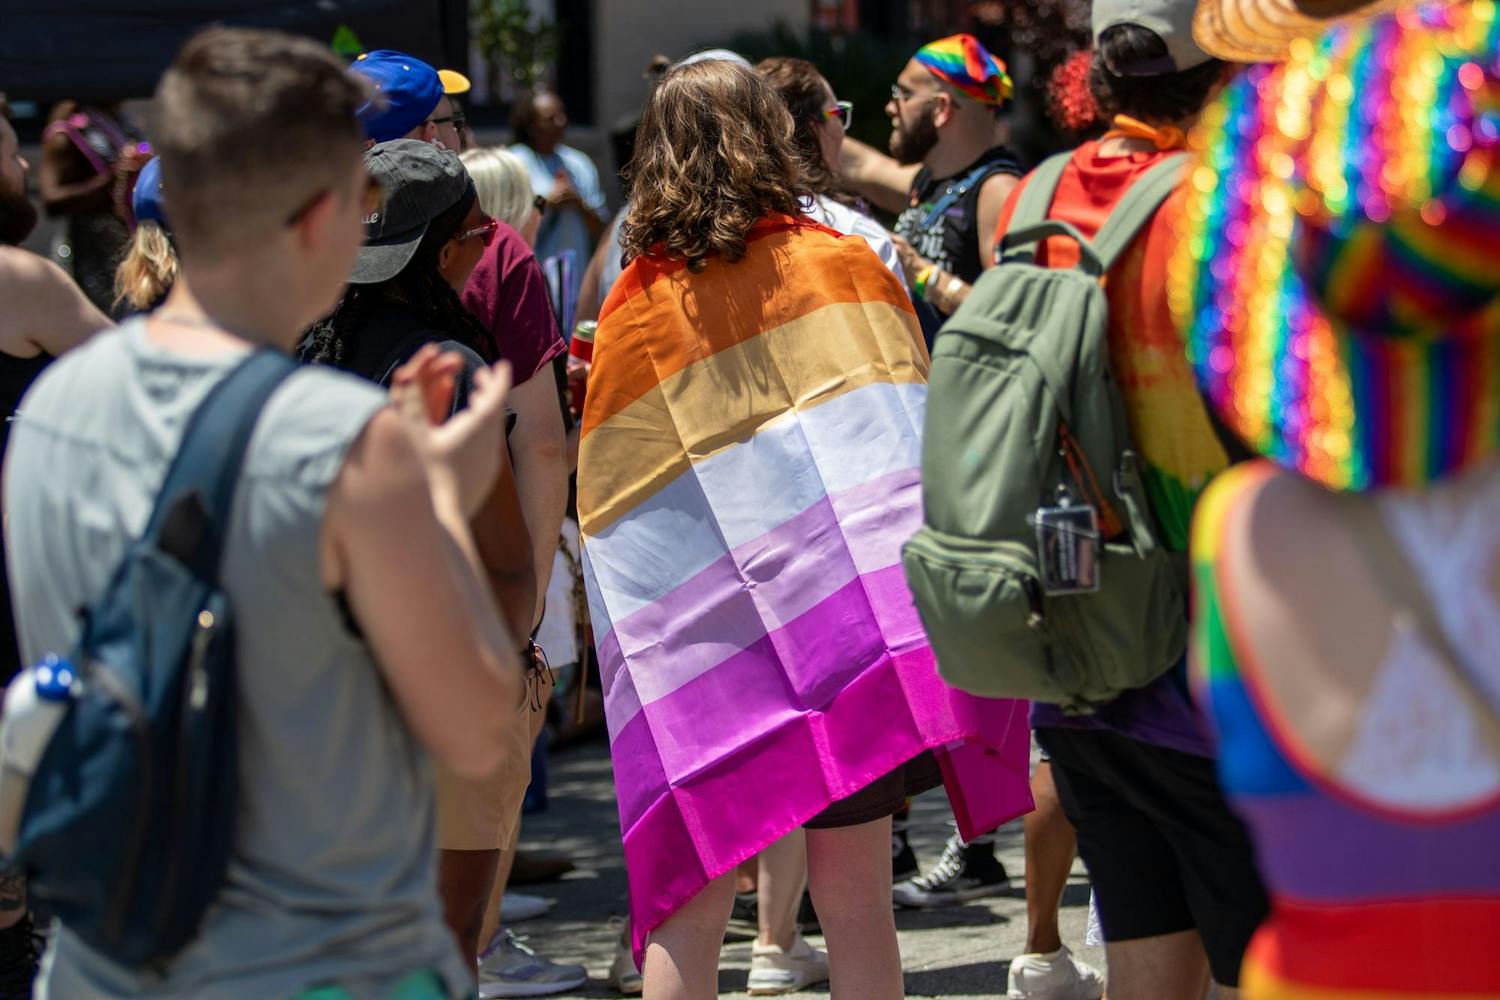 To mark the start of Pride Month, the South Carolina Pride Movement hosted Outfest, showcasing a variety of vendors, small businesses, and a vibrant drag pageant. The one-day festival, held in Columbia’s Vista, drew around 10,000 attendees to celebrate and support the LGBTQIA+ community and allies.